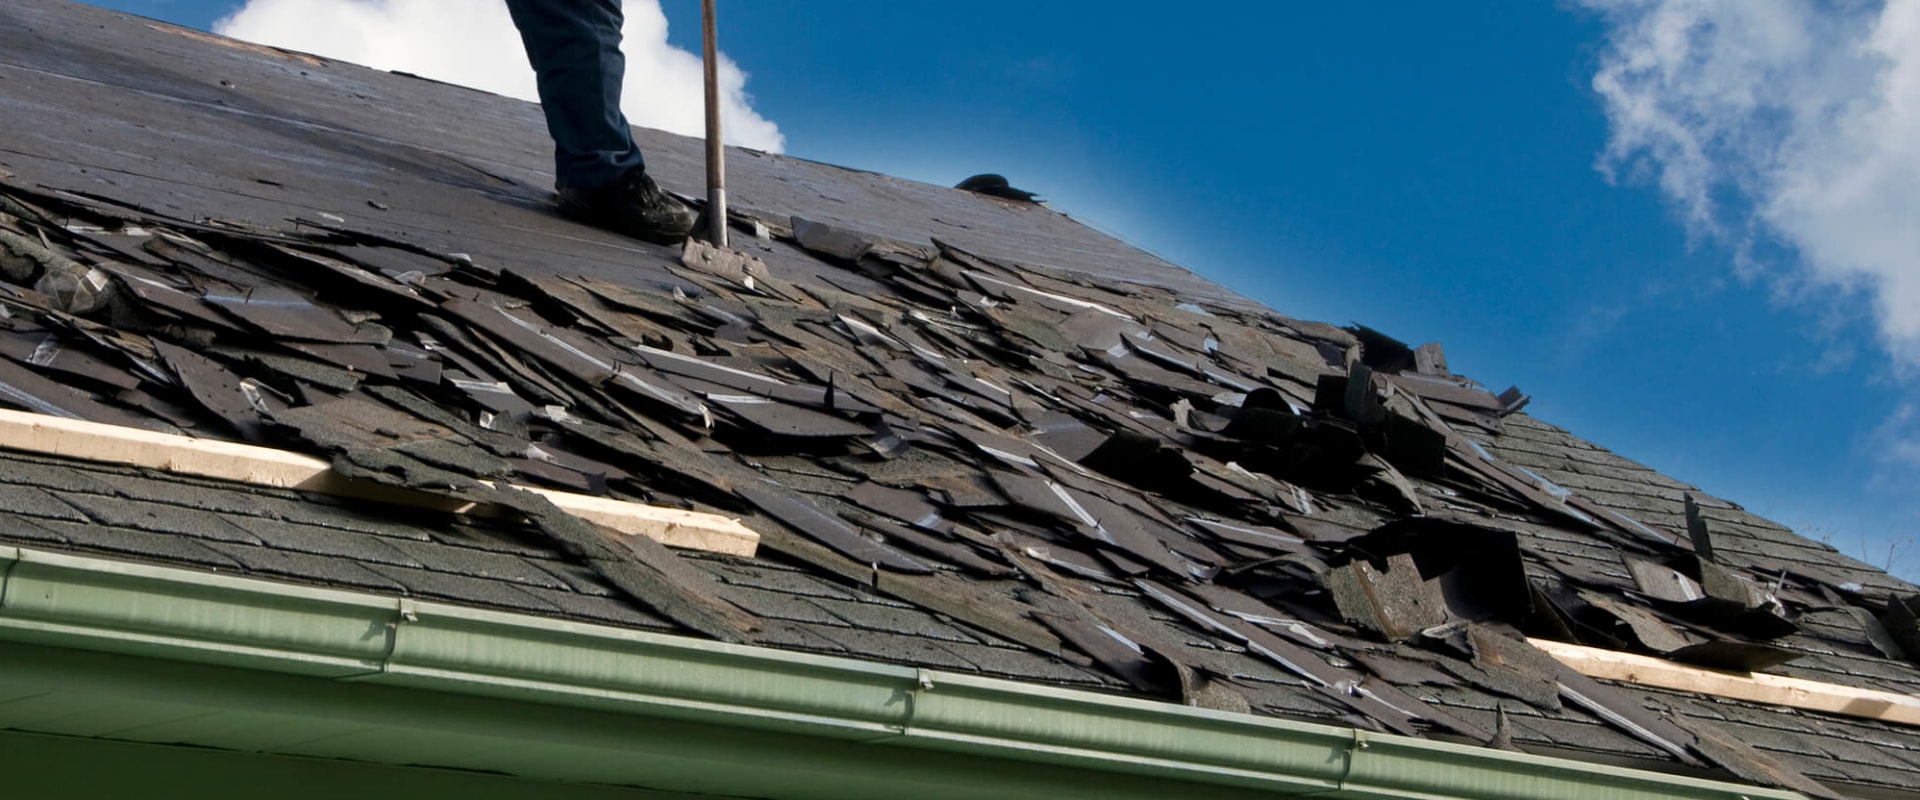 How many bundles of shingles does it take to cover 1000 square feet?